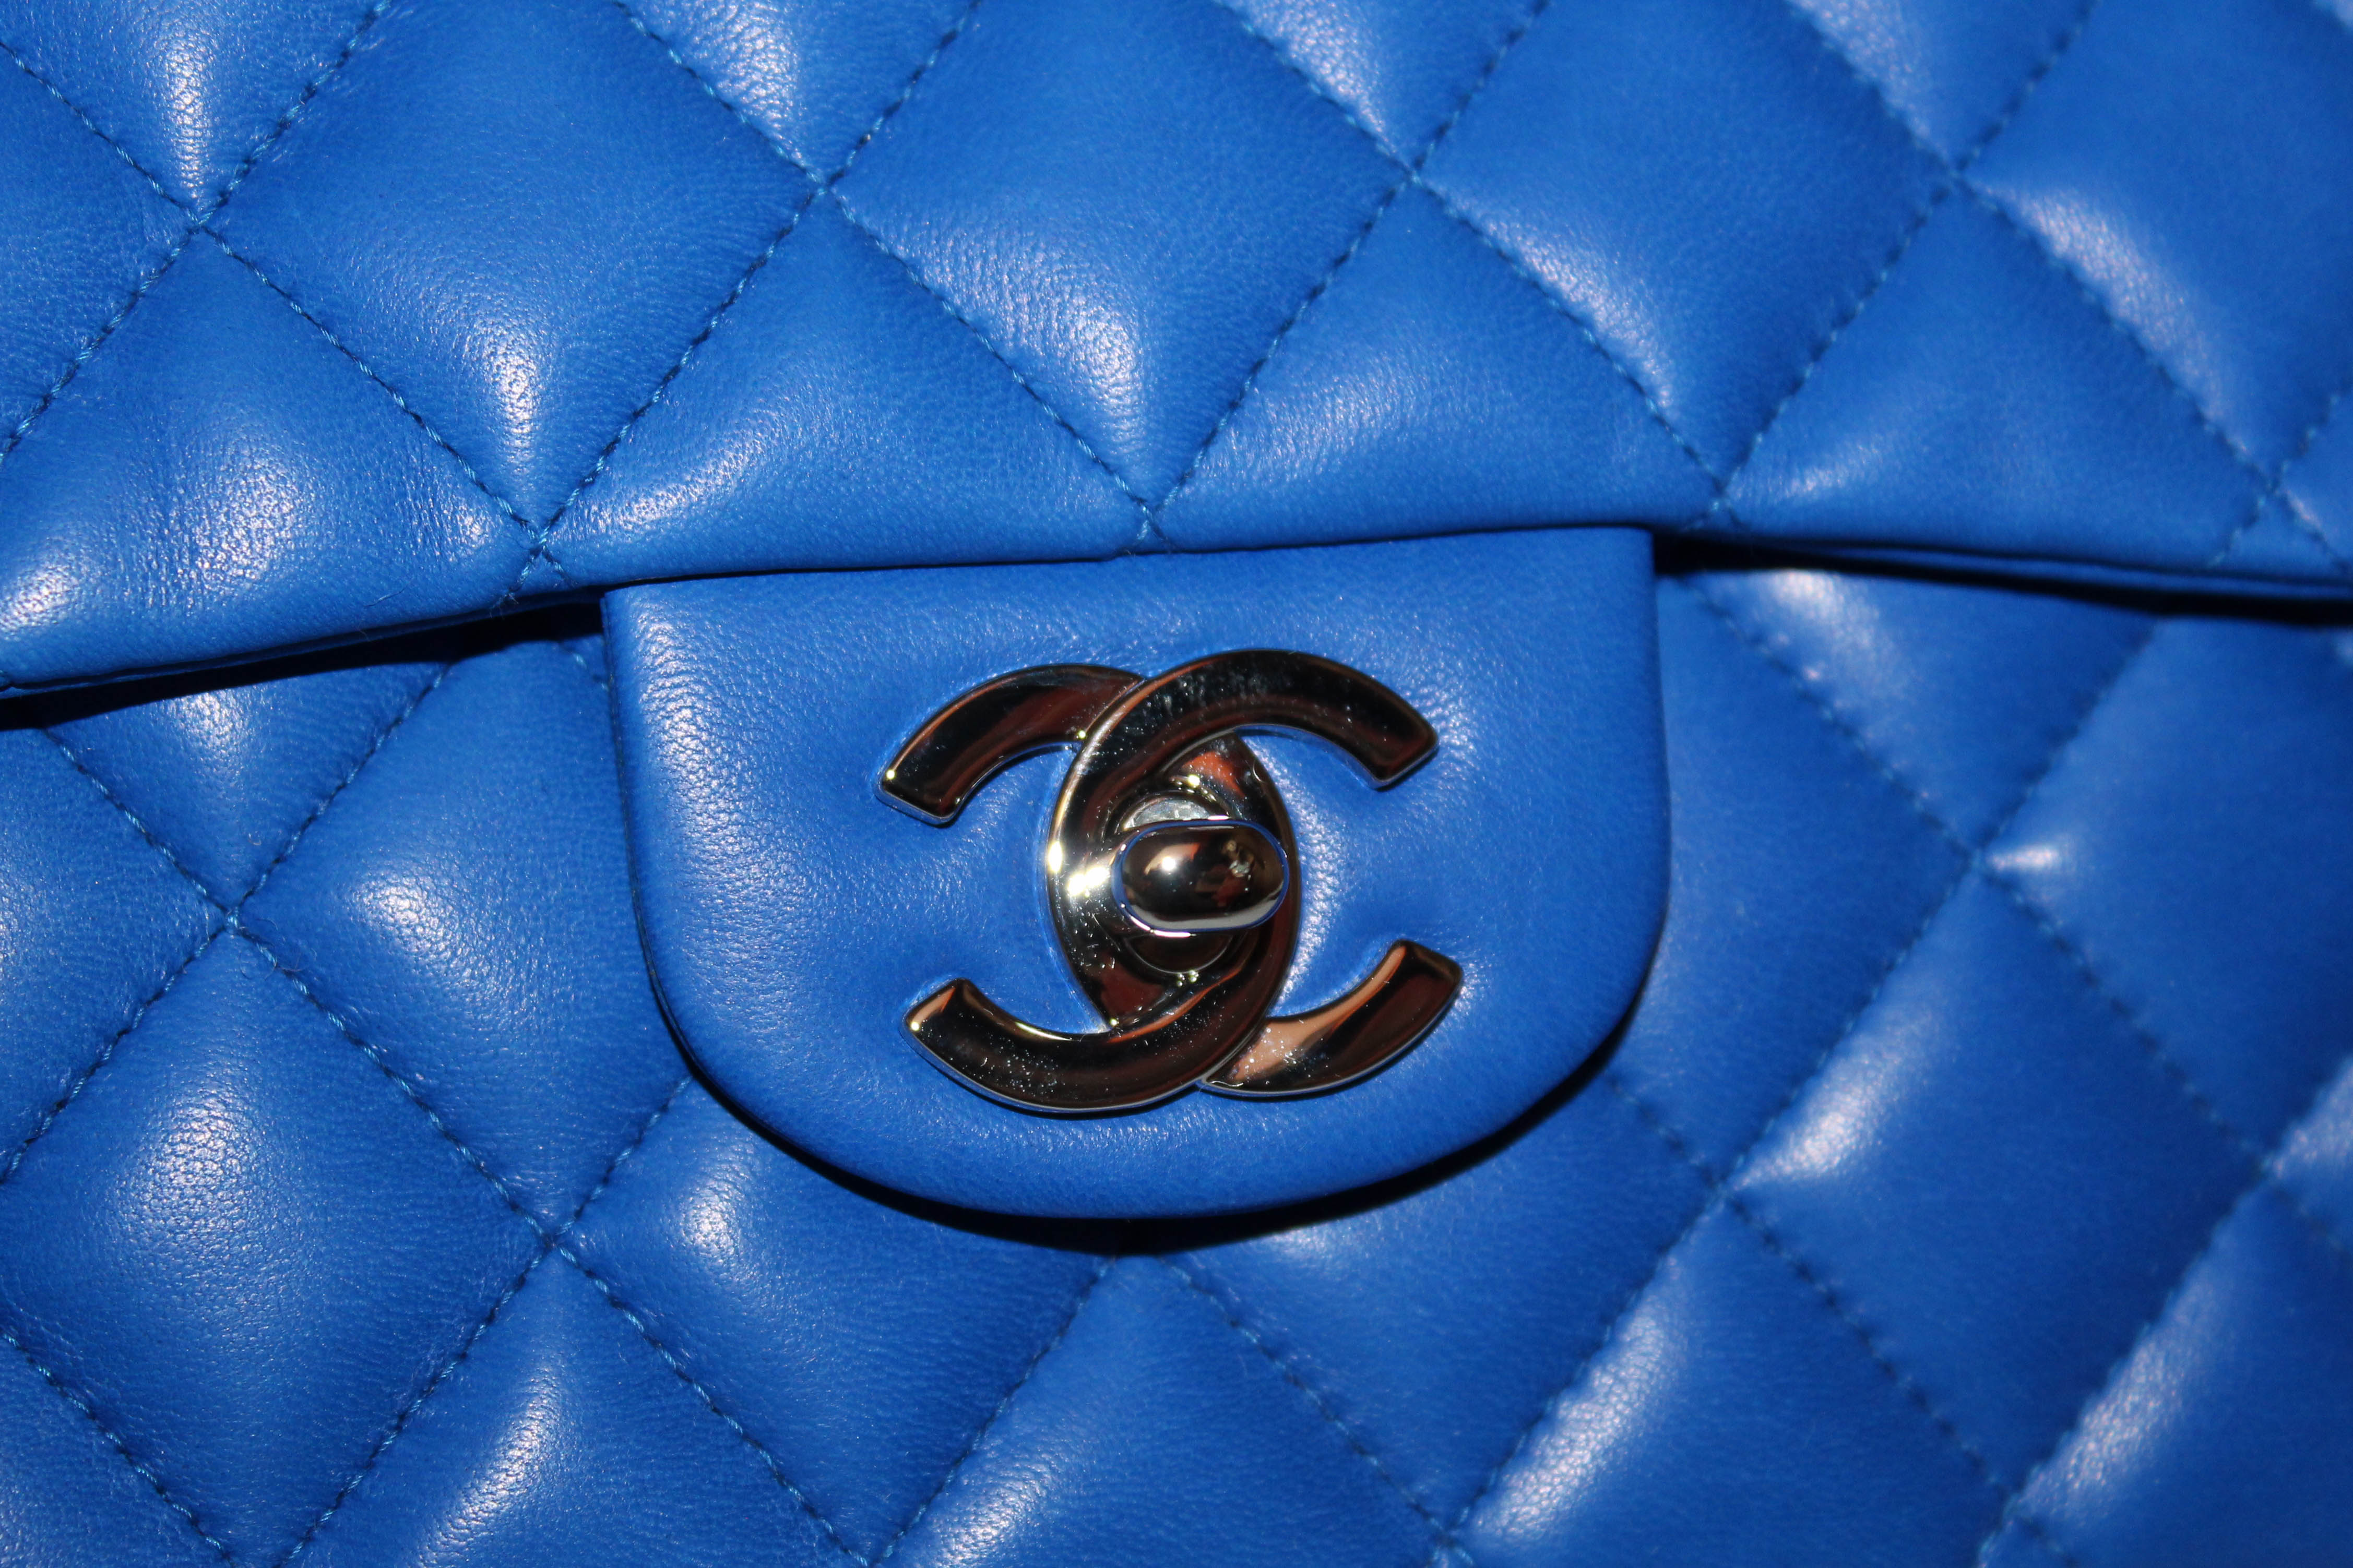 Authentic New Chanel Electric Blue Lambskin Quilted Leather Charrm Medium Classic Shoulder Bag